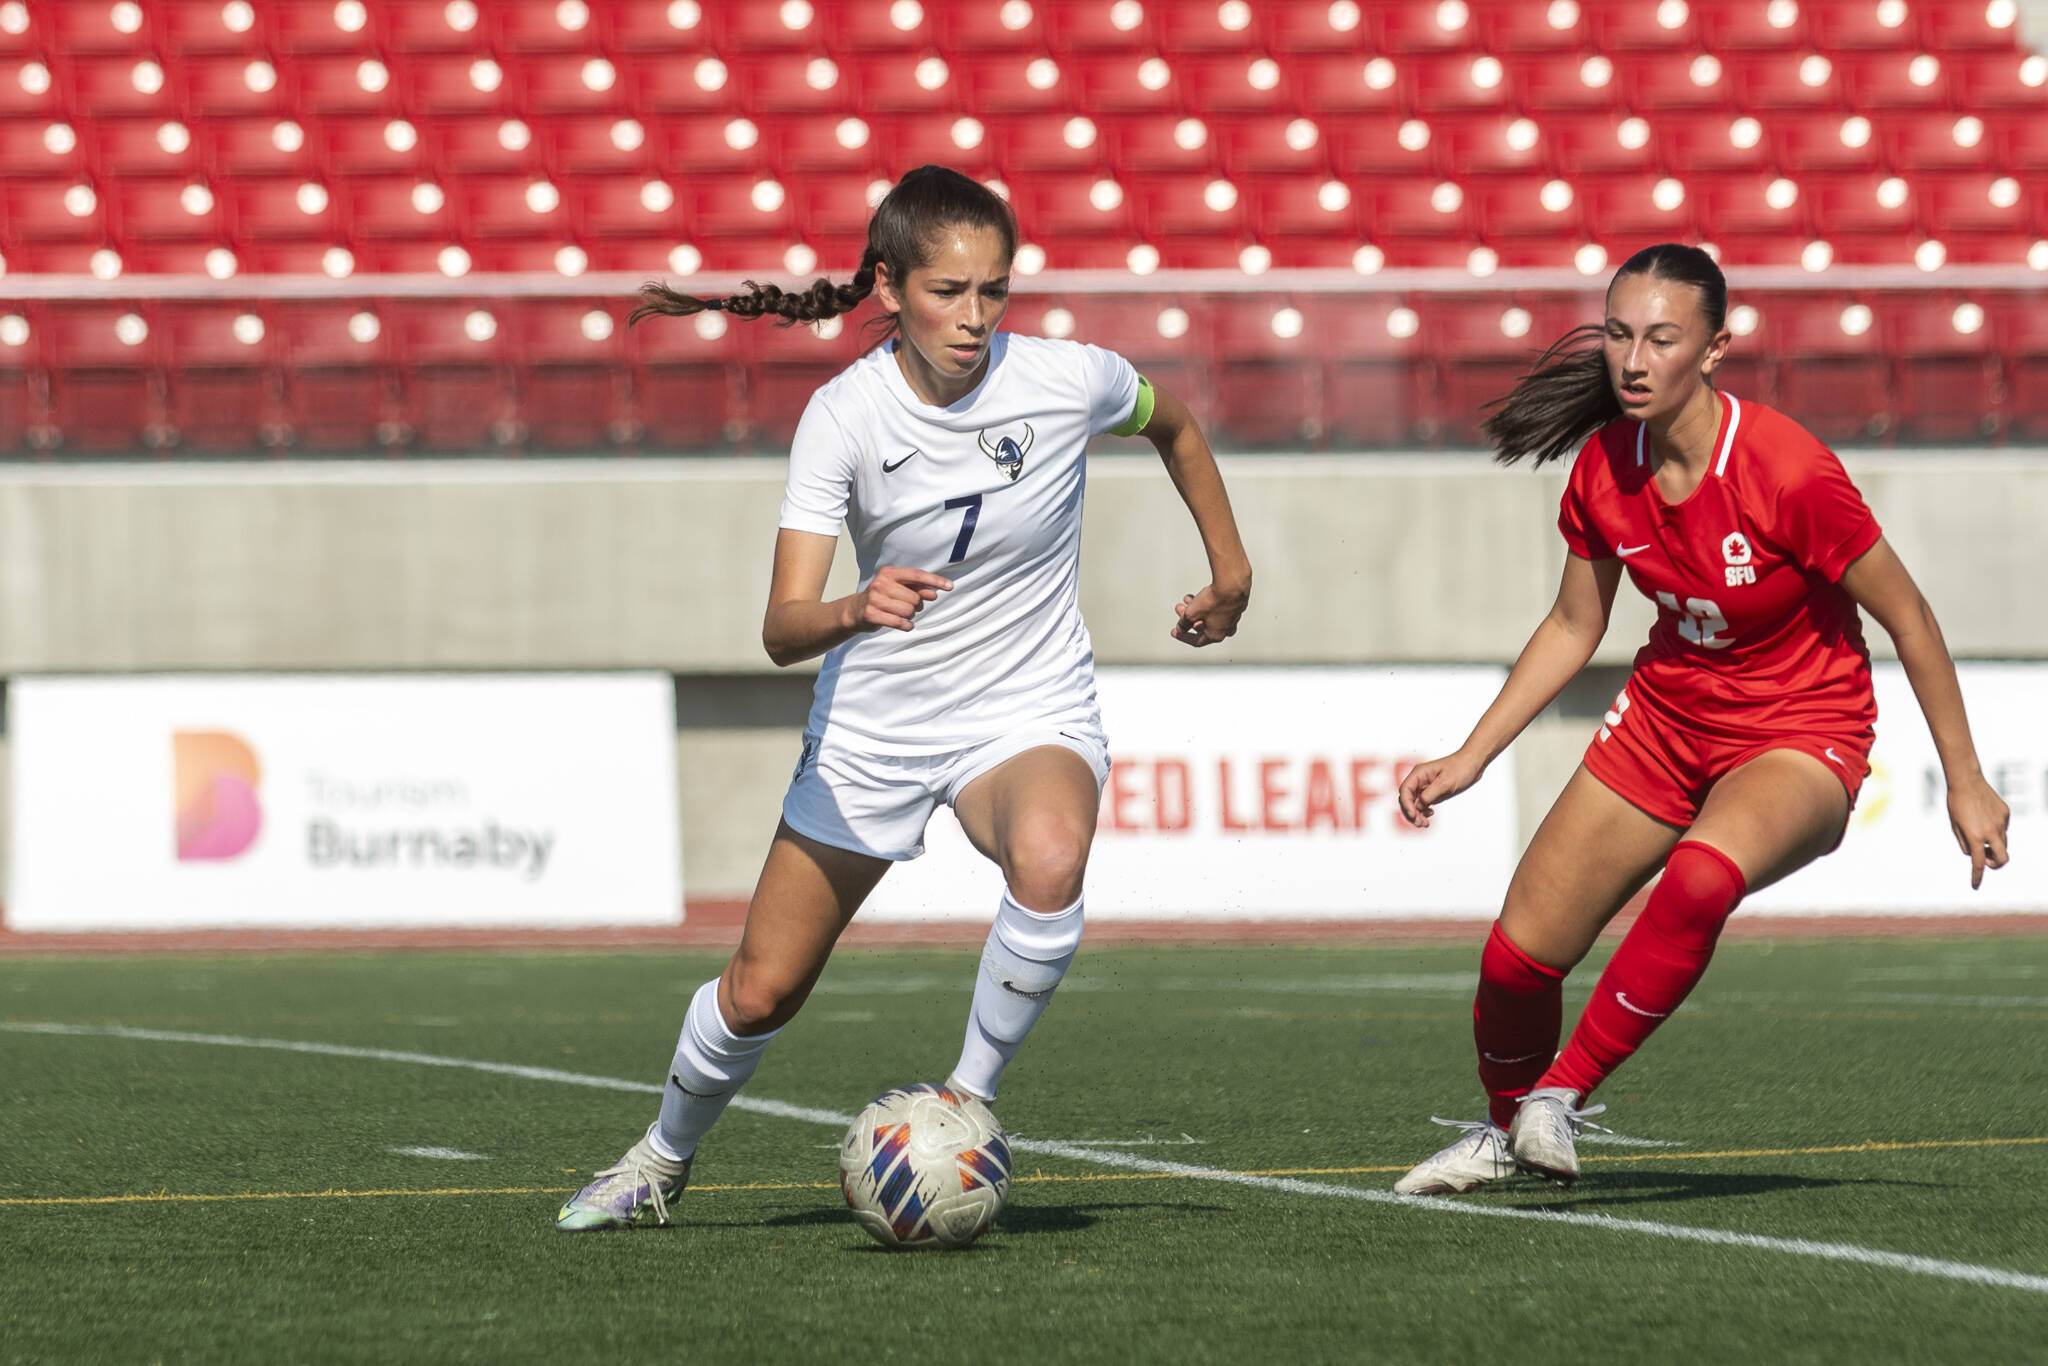 Western Washington’s Dayana Diaz (left), a Granite Falls High School graduate, dribbles the ball during a game against Simon Fraser on Oct. 8 in Burnaby, B.C. (Photo provided by WWU)